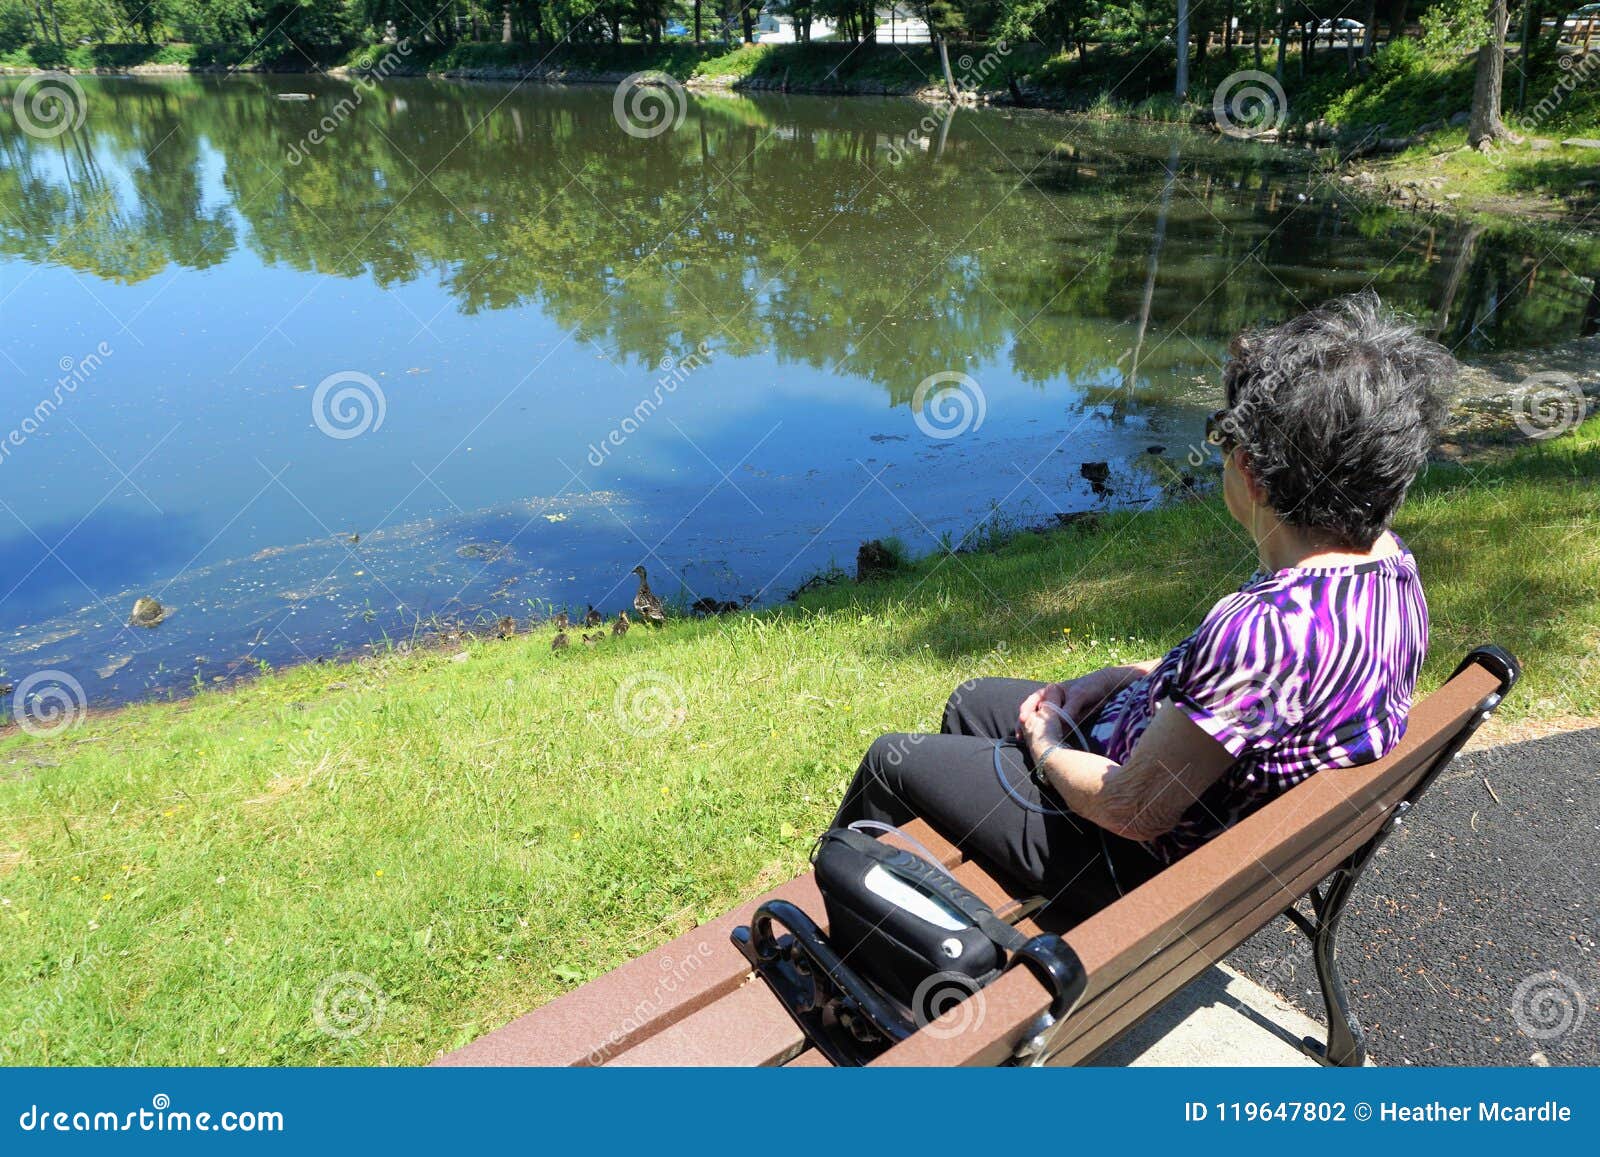 older woman sits on bench with oxygen tank looking at pond